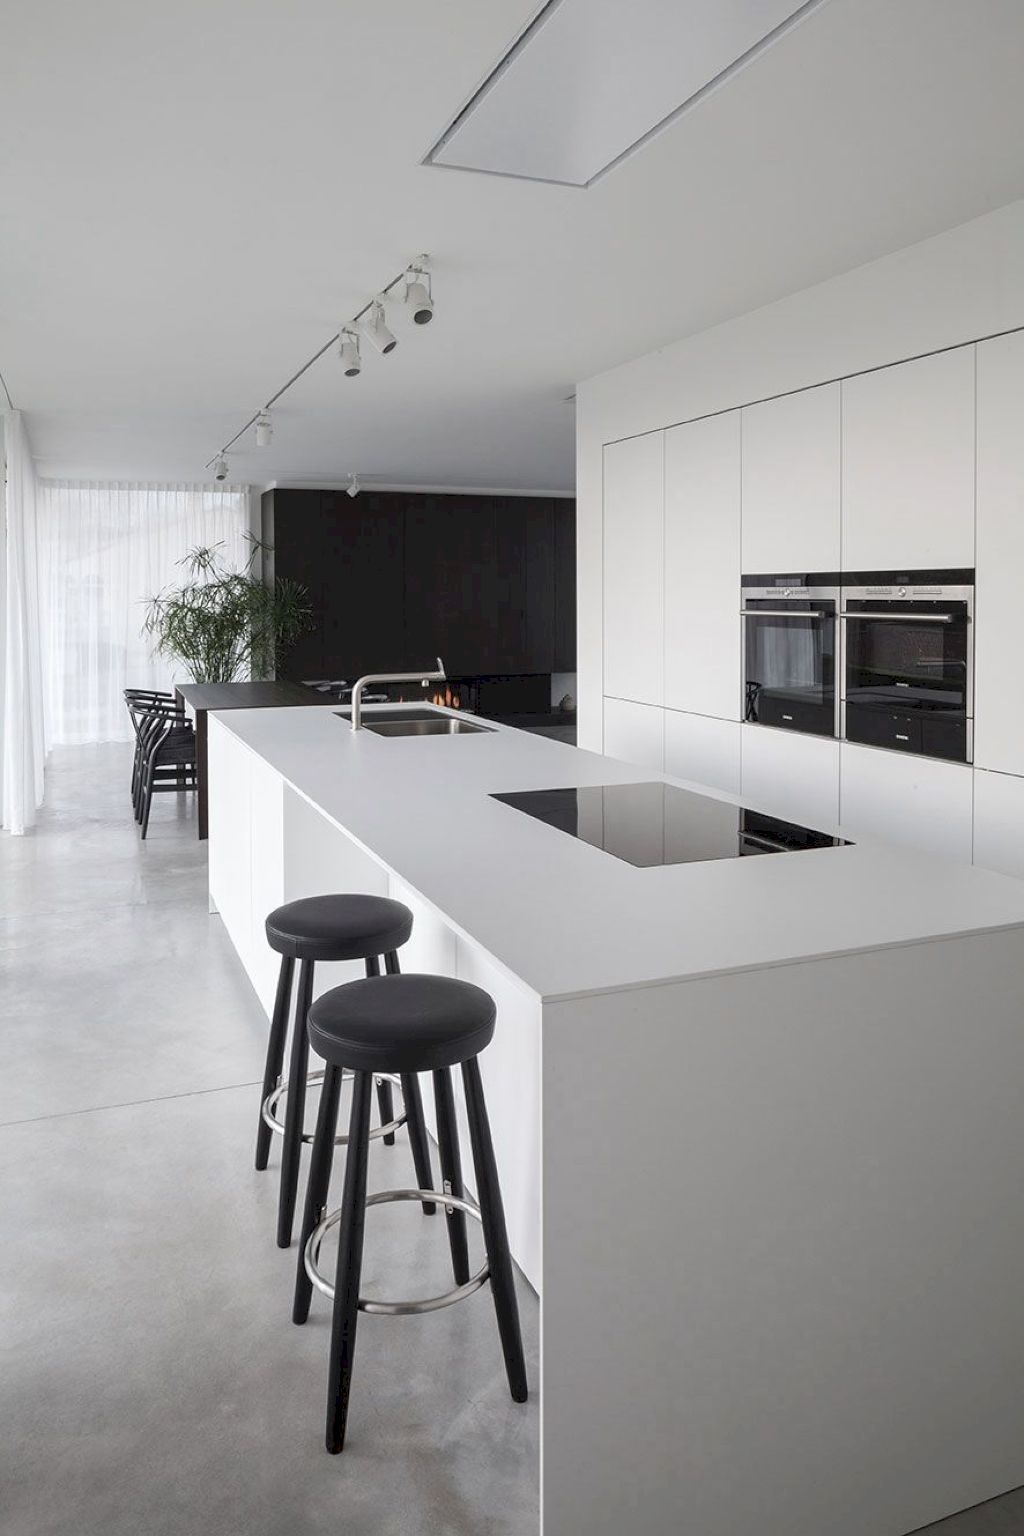 Elegant Minimalist Kitchen Design Ideas For Small Space To Try 28